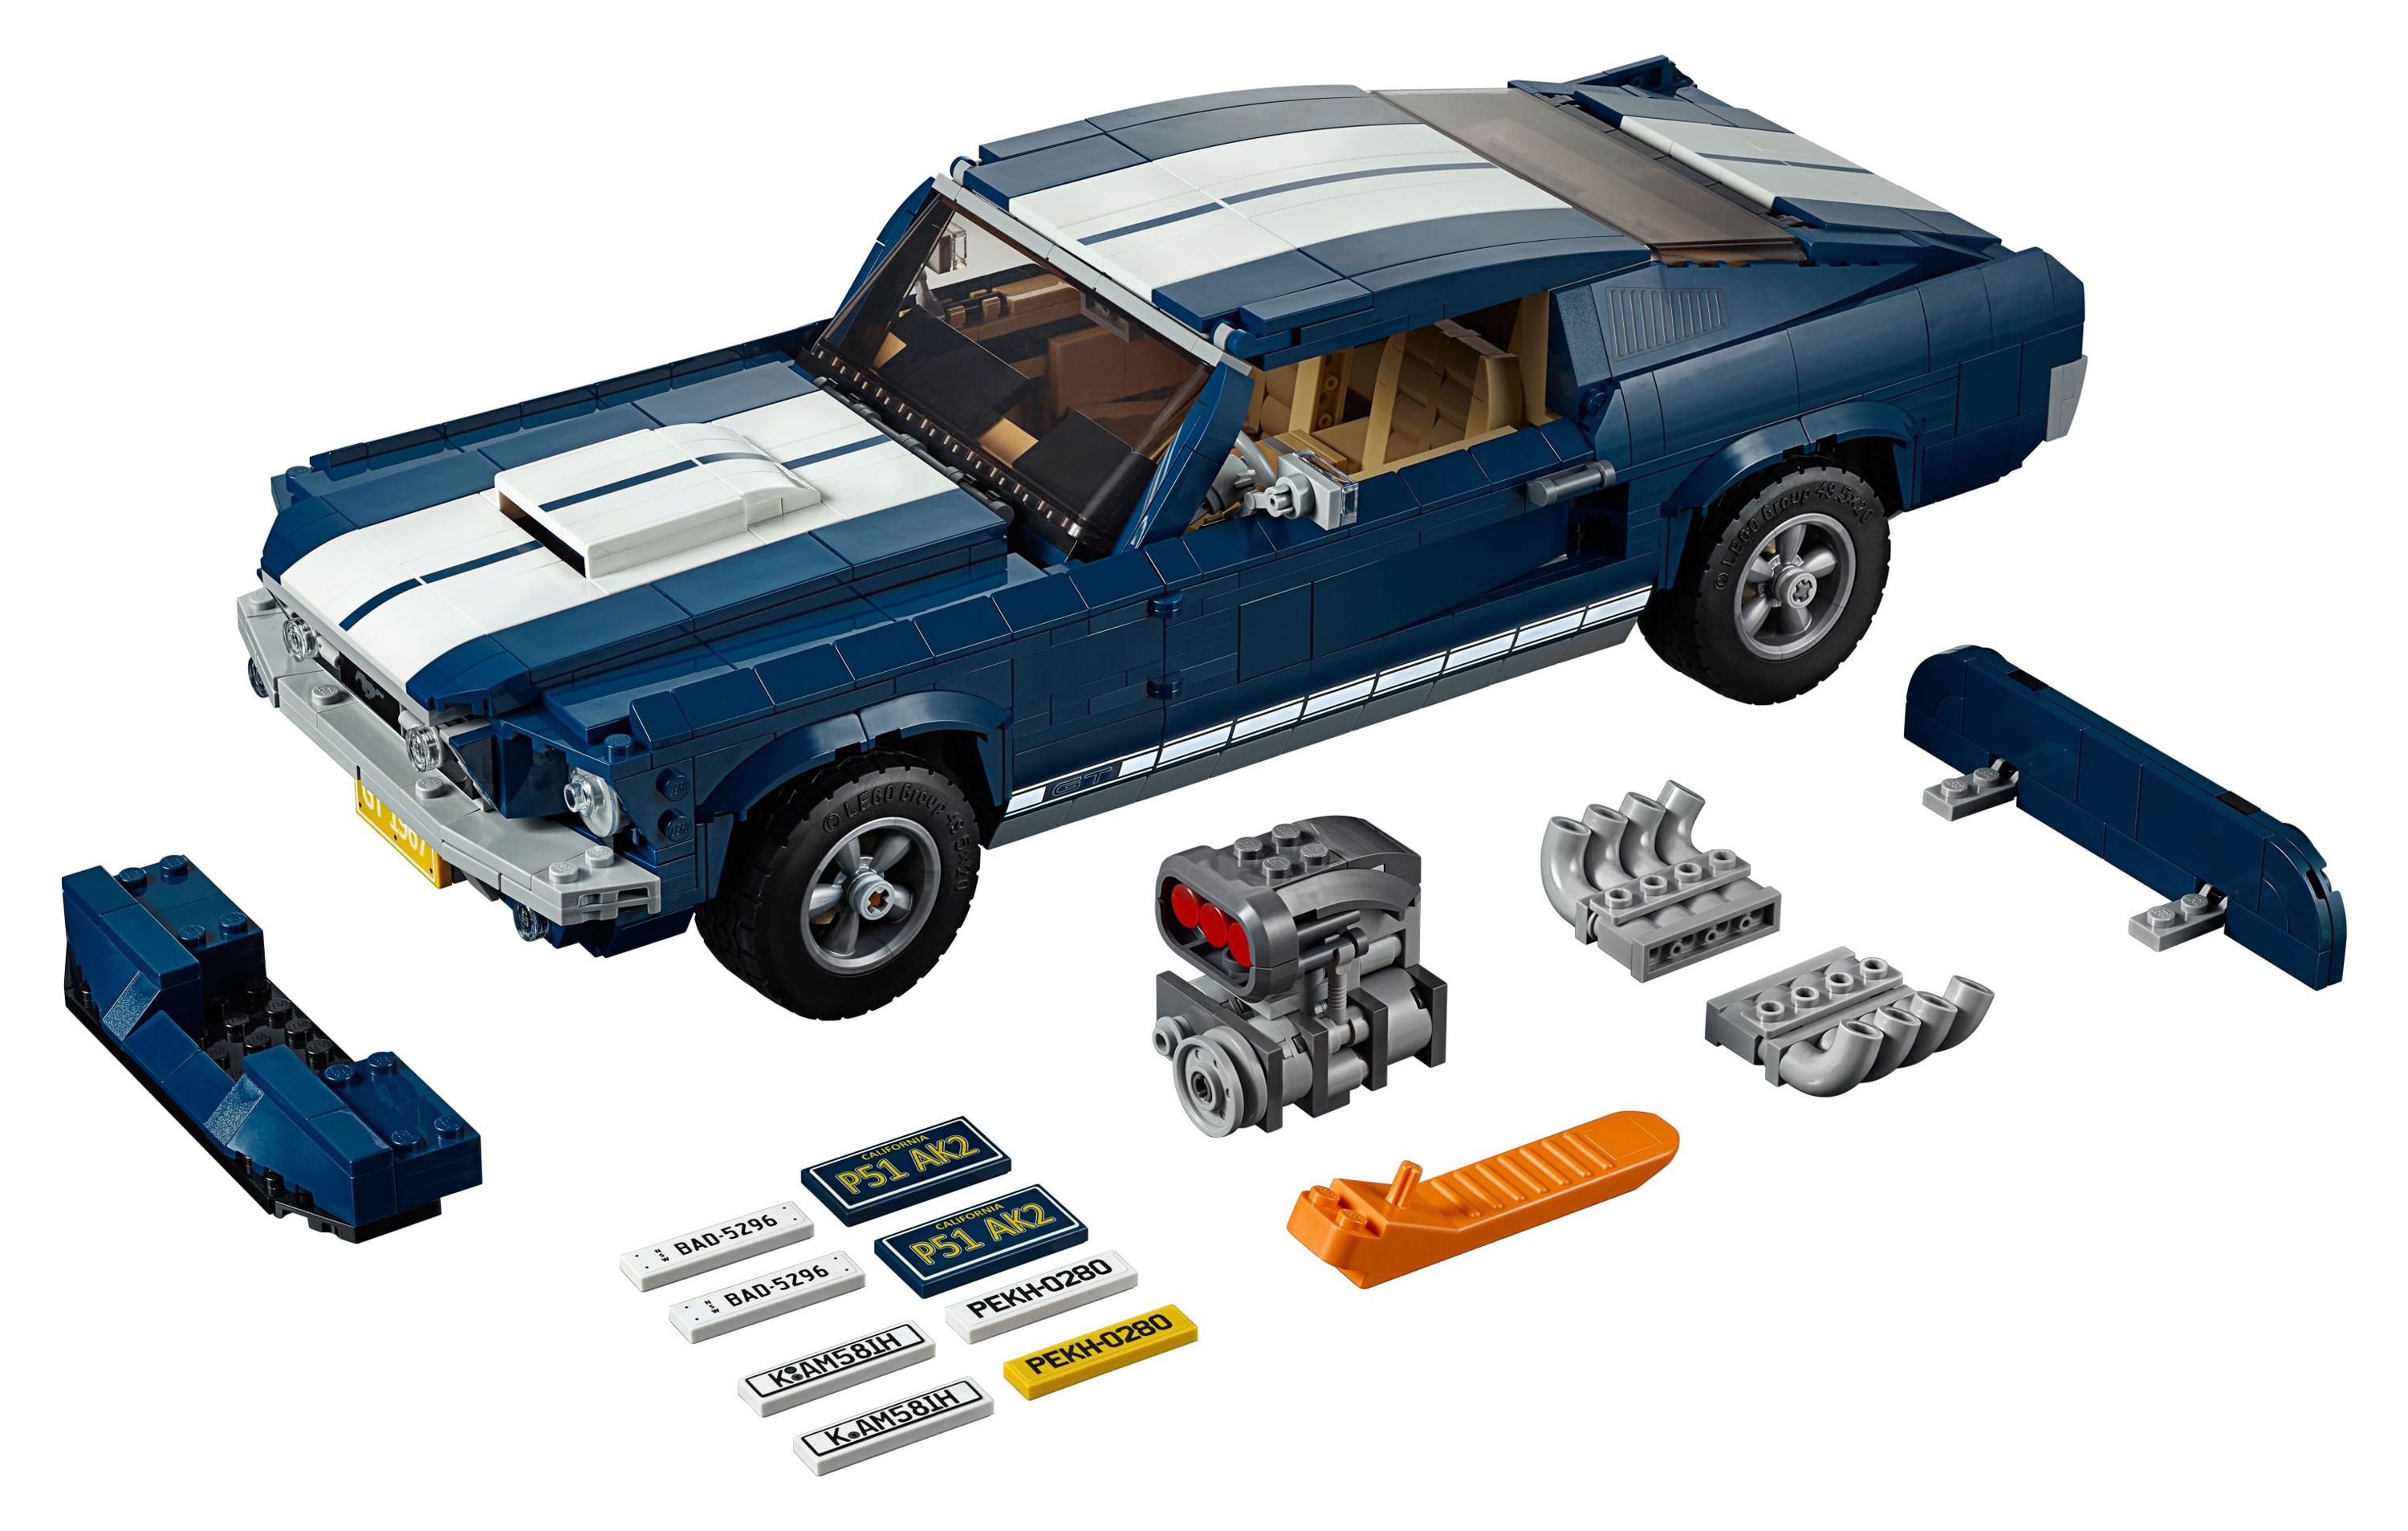 LEGO Creator Expert Ford Mustang 10265 Building Set - Exclusive Advanced Collector's Car Model, Featuring Detailed Interior, V8 Engine, Home and Office Display, Collectible for Adults and Teens - image 4 of 6